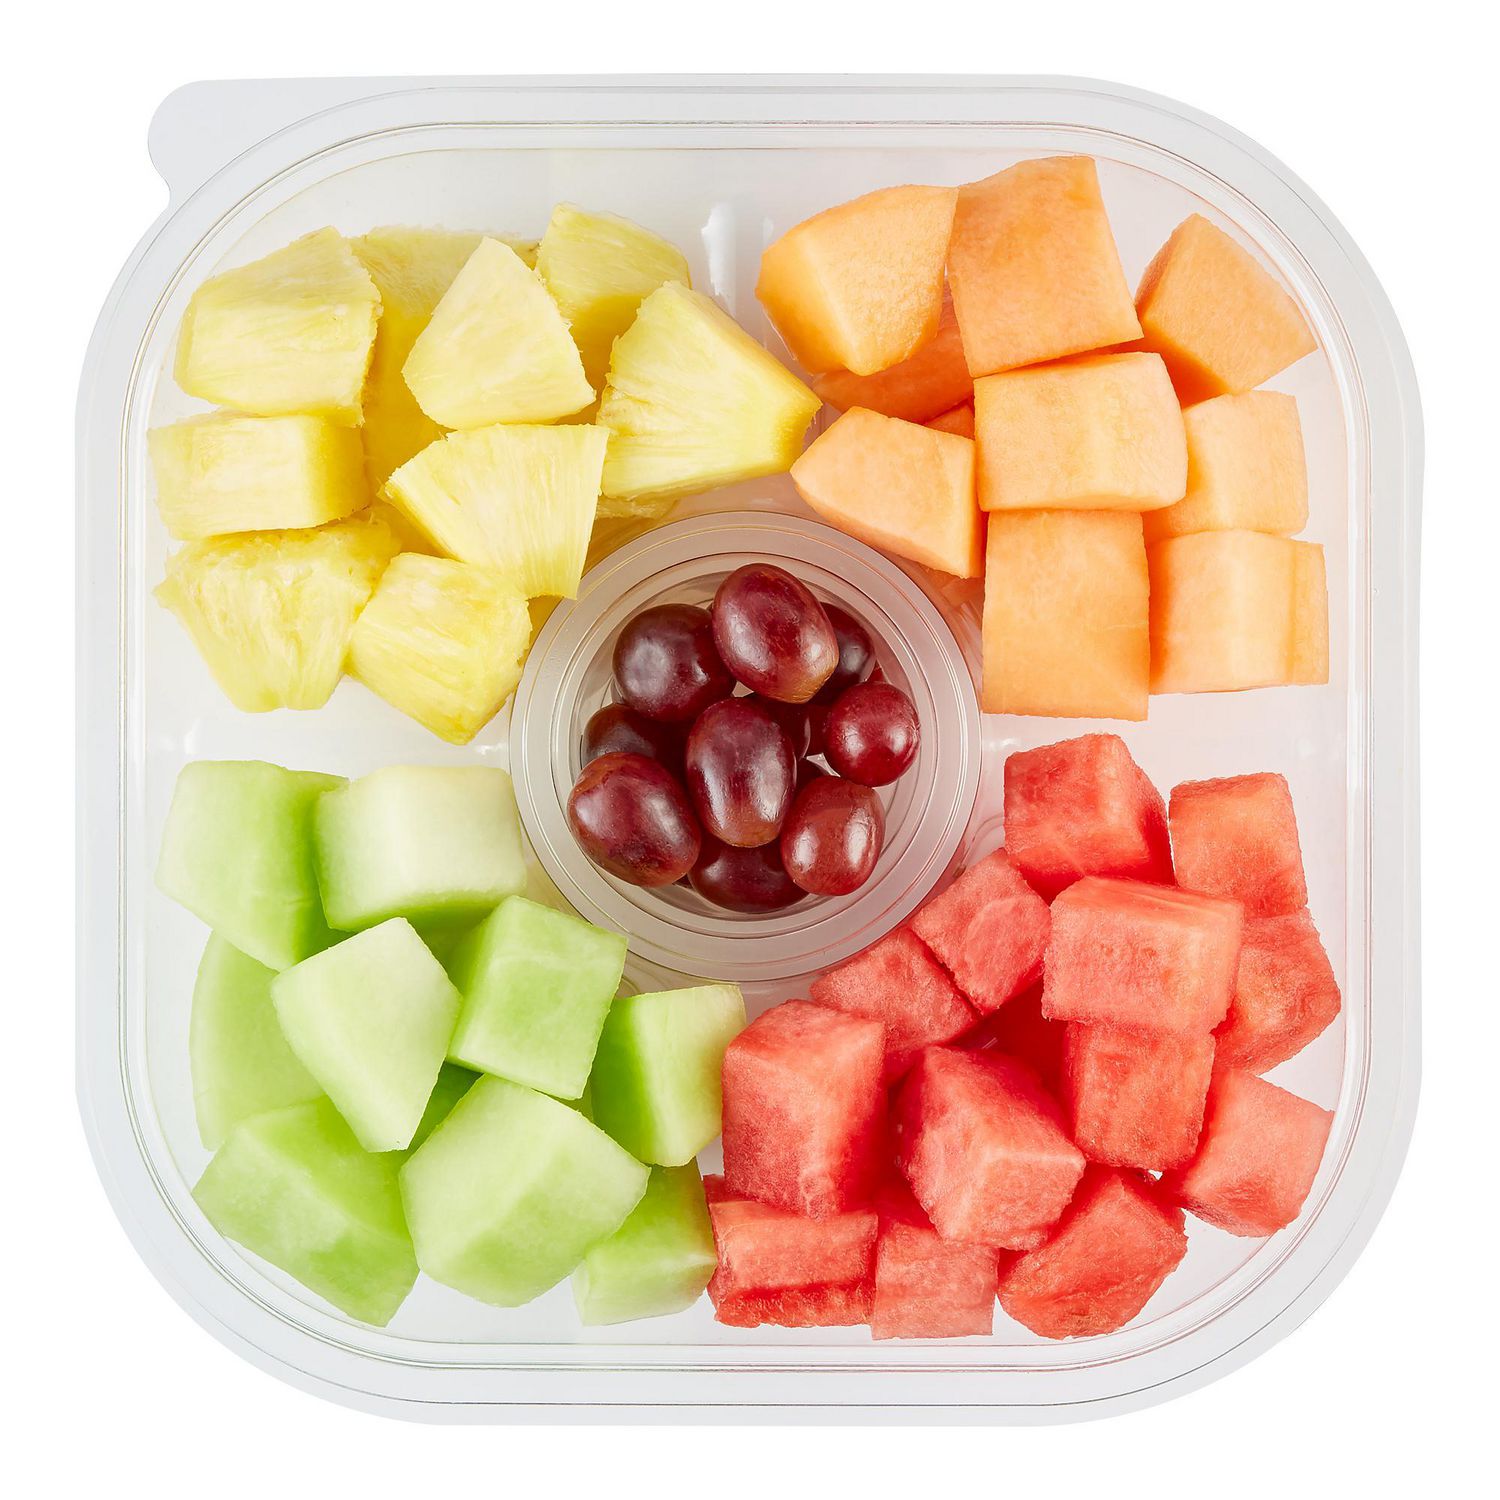 Walmart Fruit Tray Prices - How do you Price a Switches?